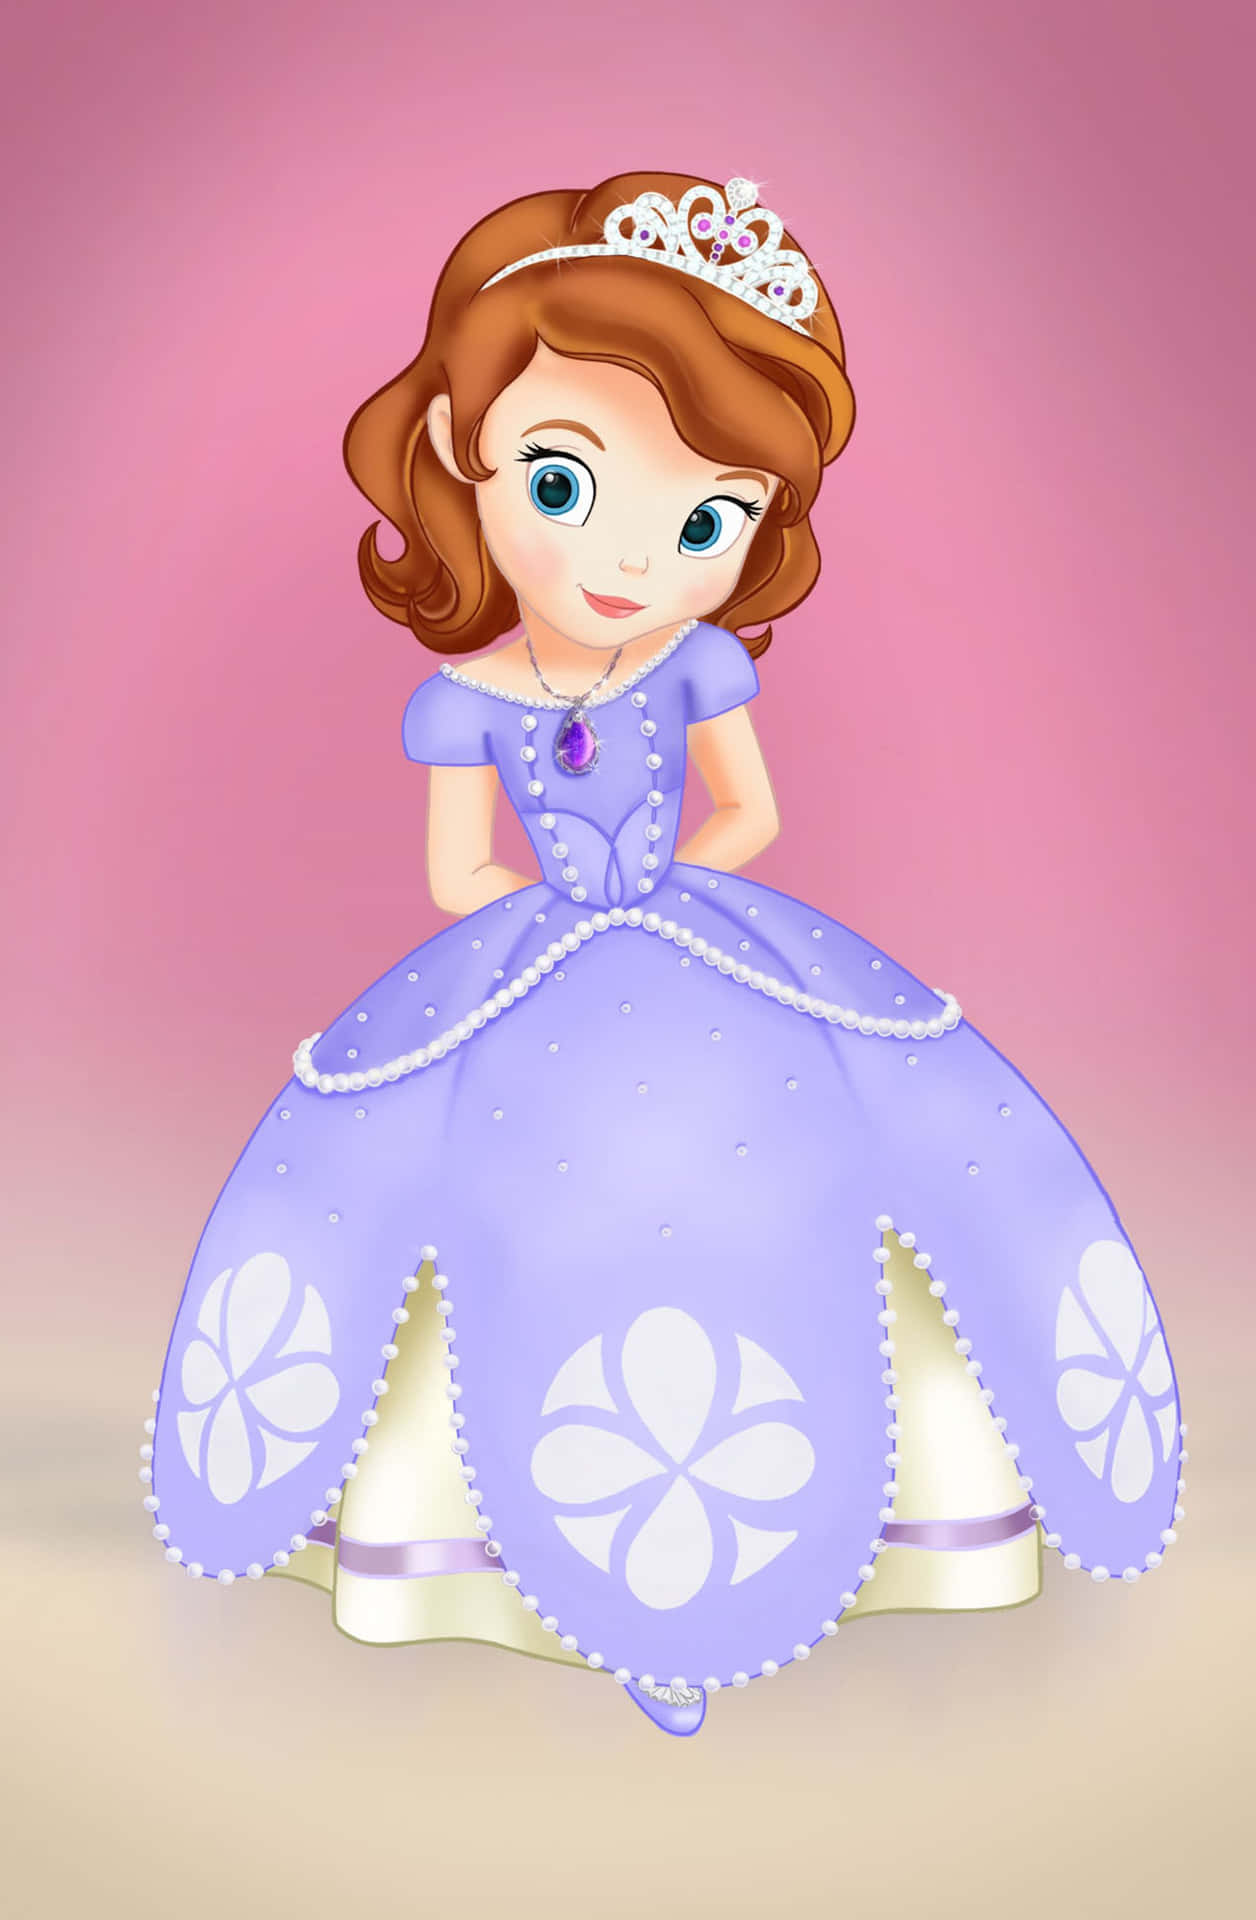 Sofia The First discovers her destiny Wallpaper